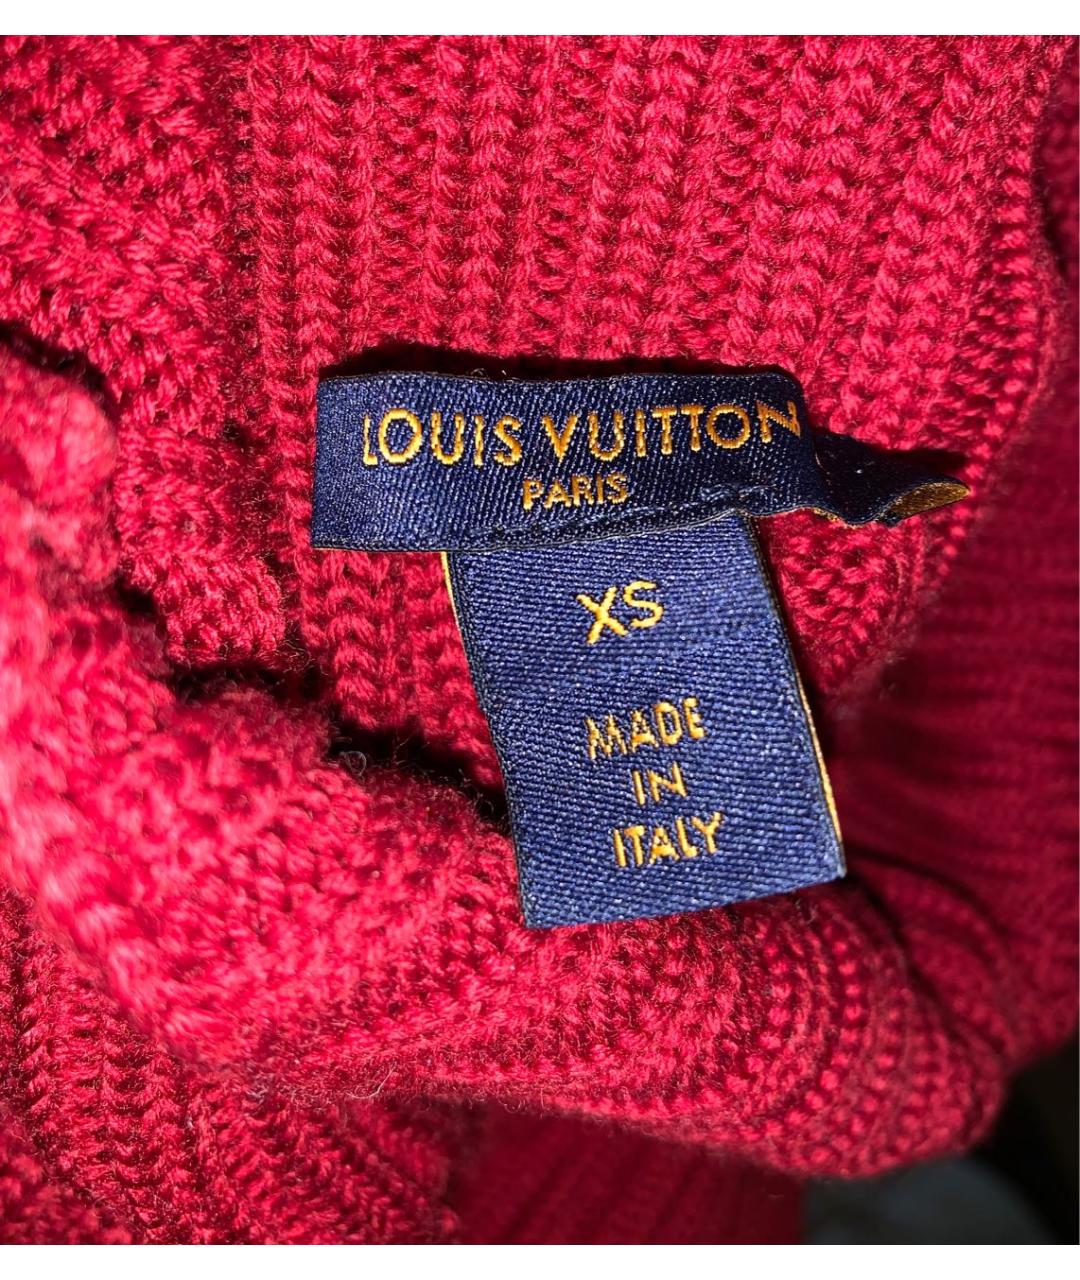 LOUIS VUITTON PRE-OWNED Красная водолазка, фото 4